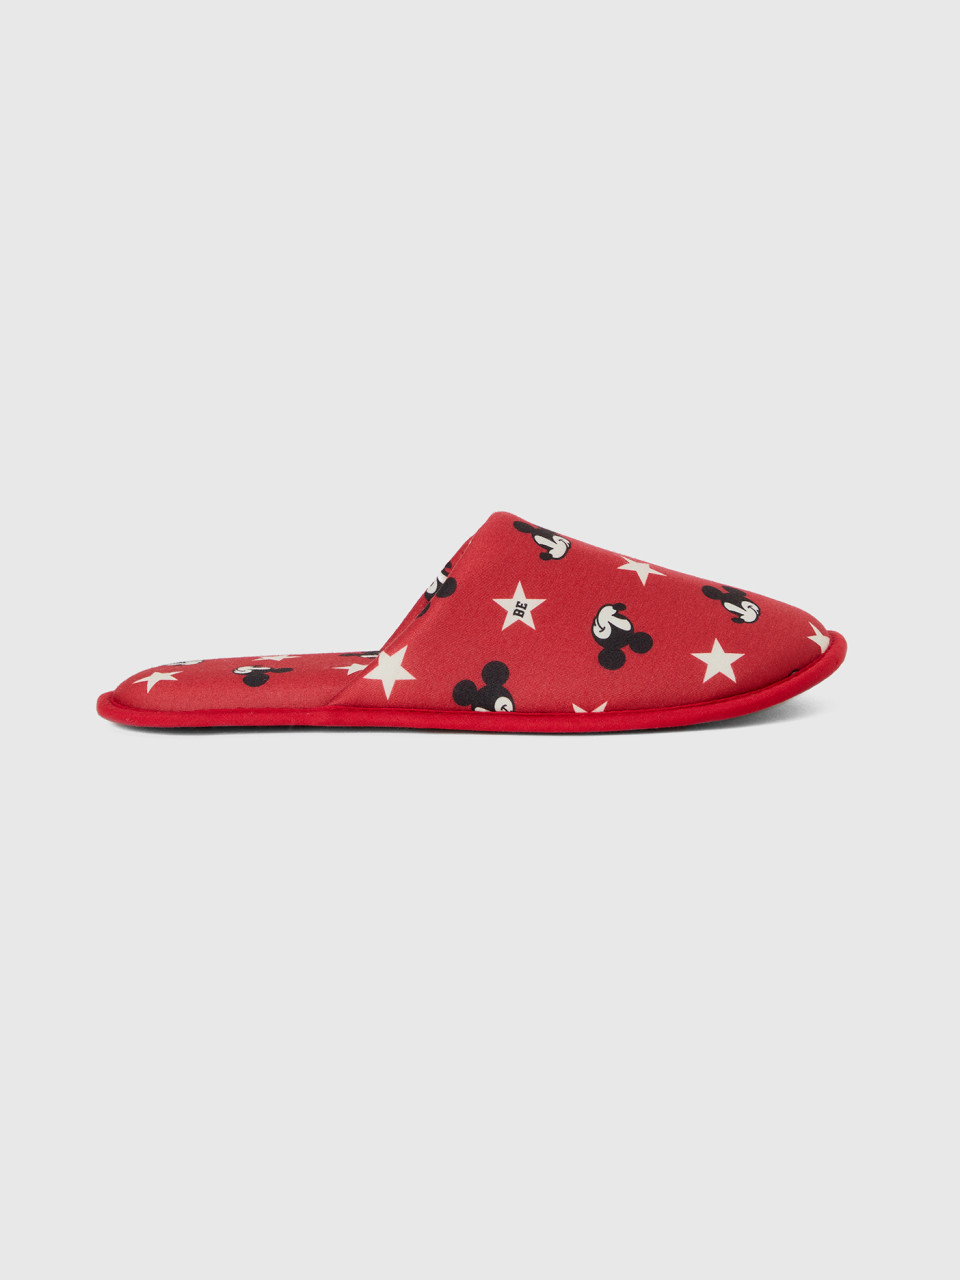 Benetton, Red Mickey Mouse Slippers, Red, Women